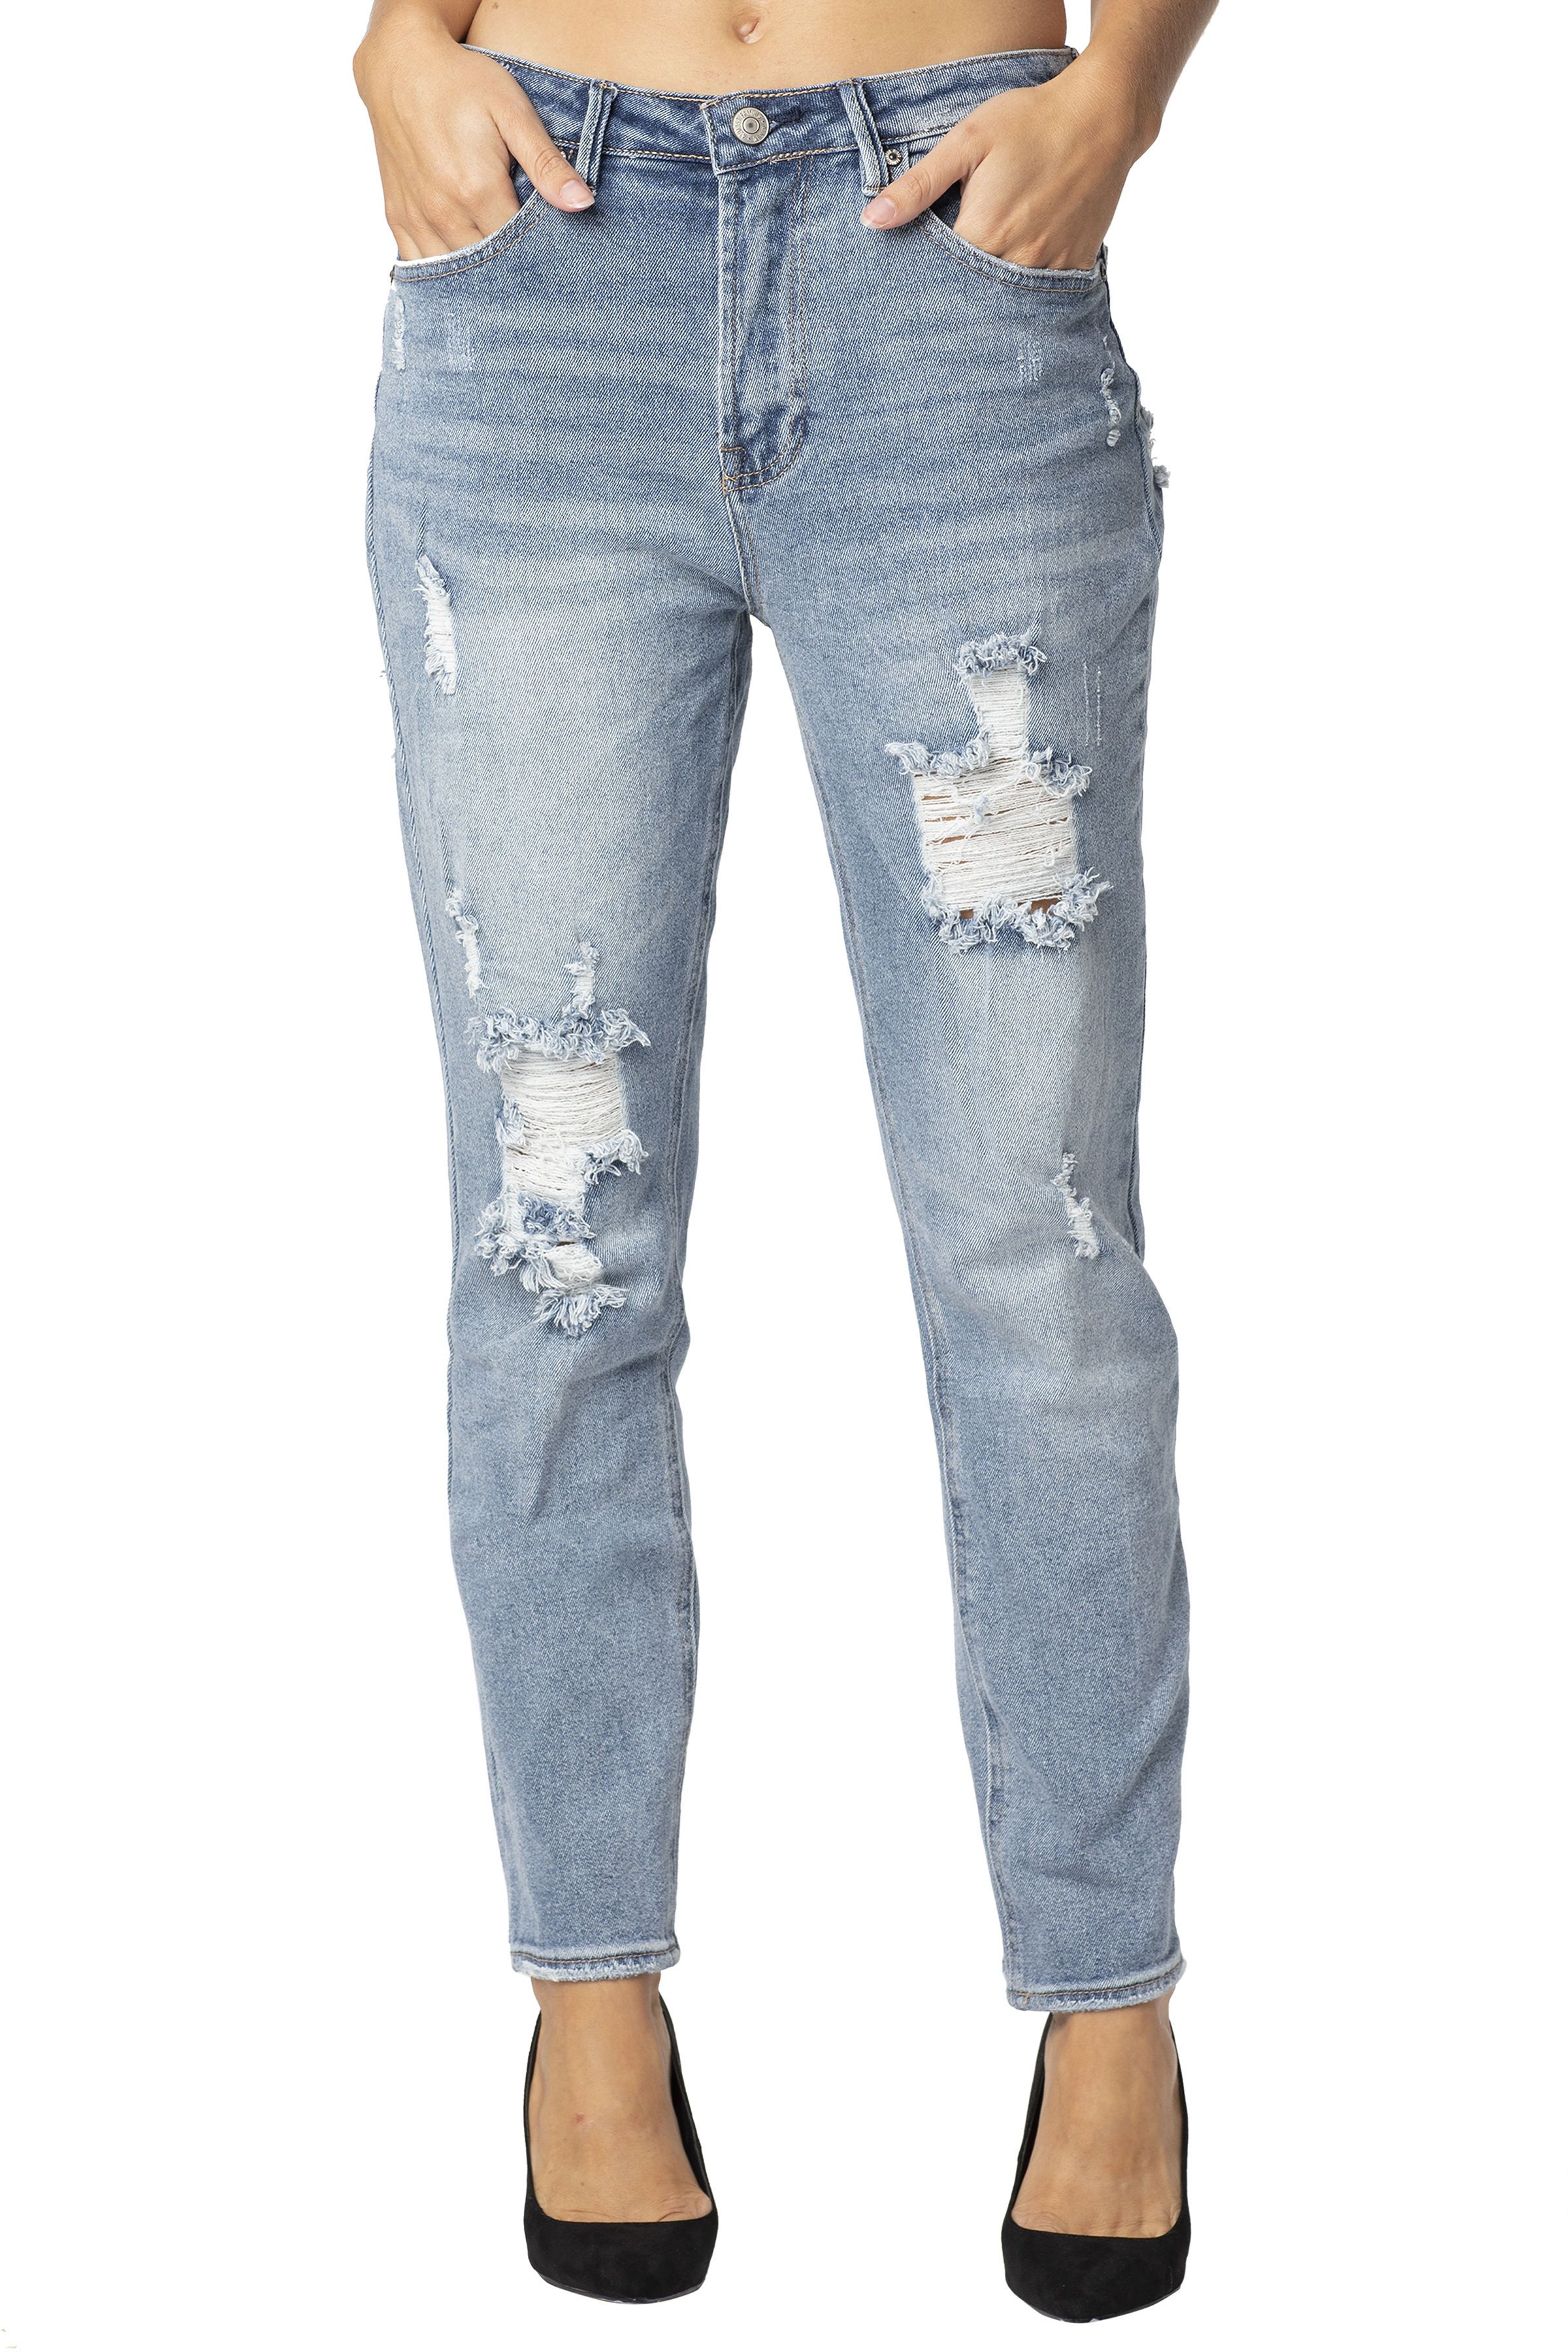 Almost Famous Juniors High Rise Cuffed Jean Denim - Vintage Ripped Front Mom Jeans for Women - image 1 of 2